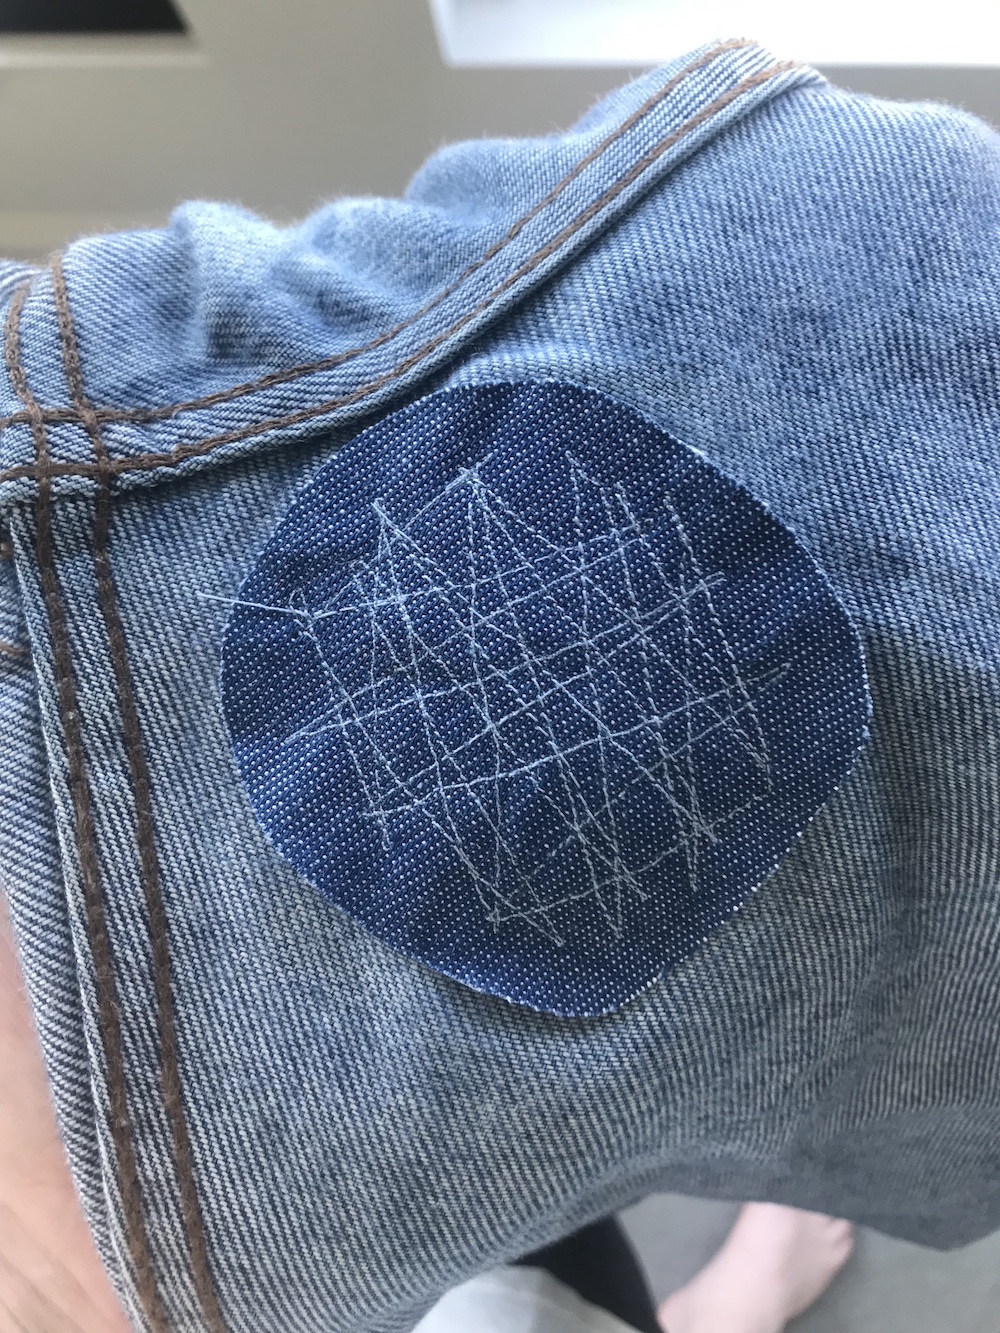 the inside of a patched hole in some jeans